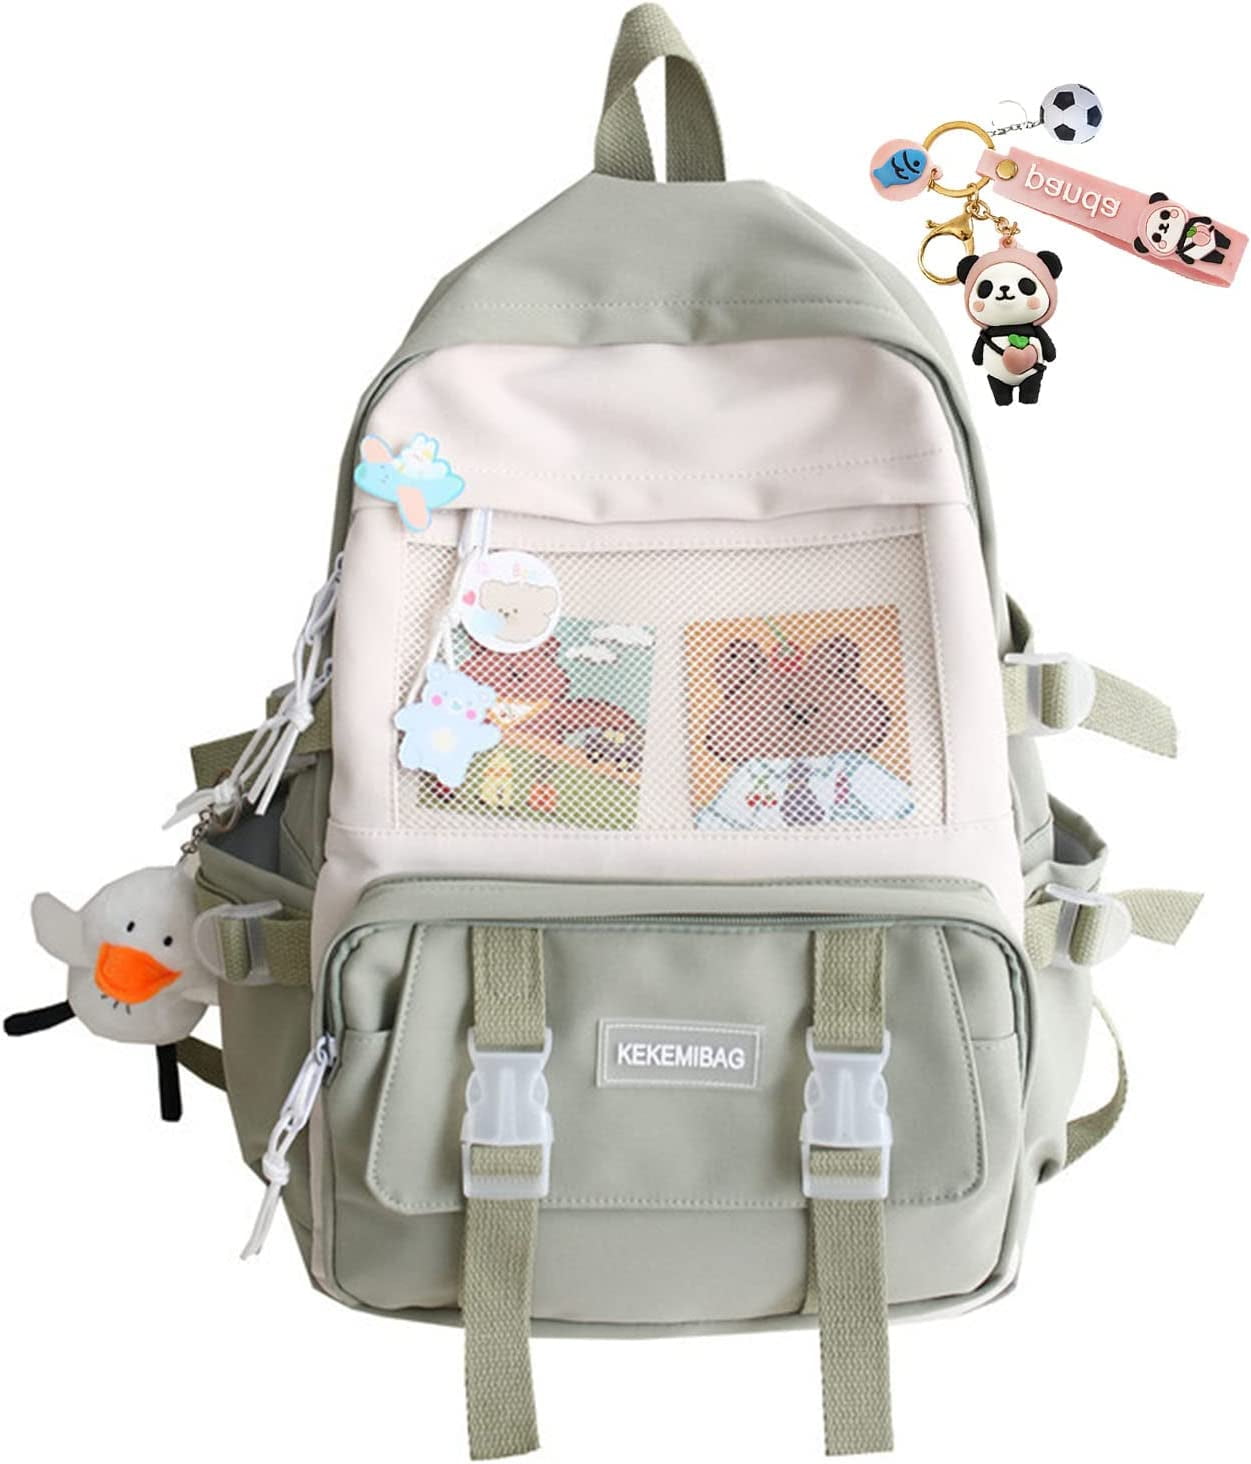 coxqermo Cartoon Teenage Girls Backpack with Cute Pins Accessories, Ita Bag  Middle School Backpack Students Bookbag 21L Casual Daypack